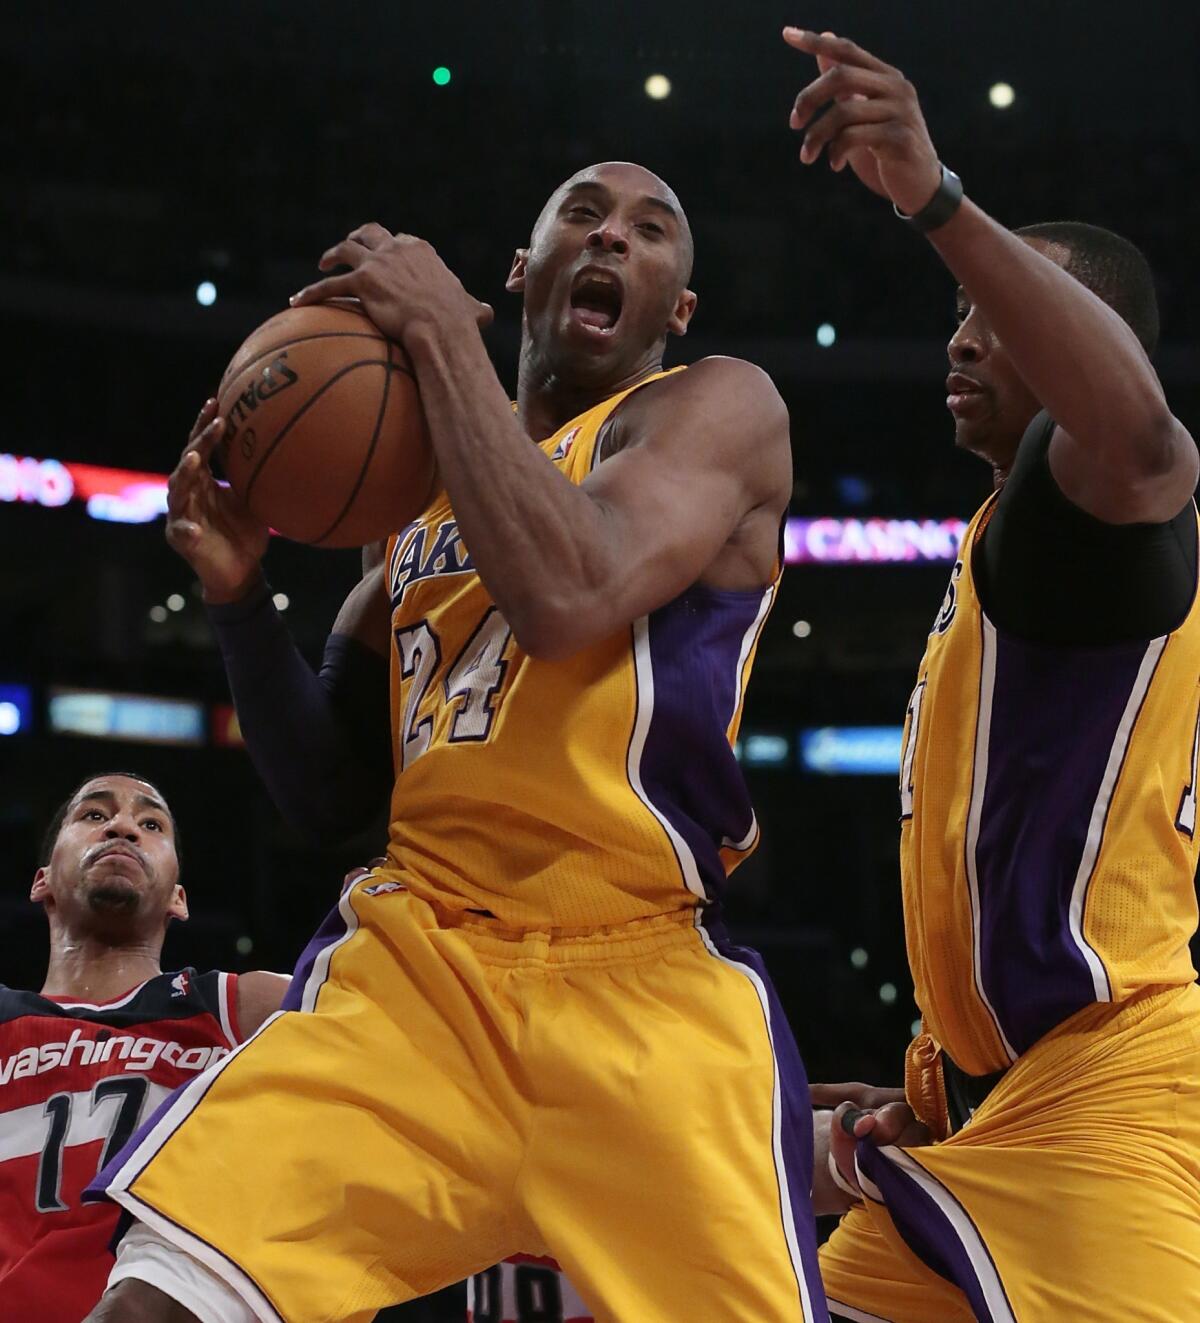 Lakers star Kobe Bryant is making progress in his recovery from a torn Achilles tendon.